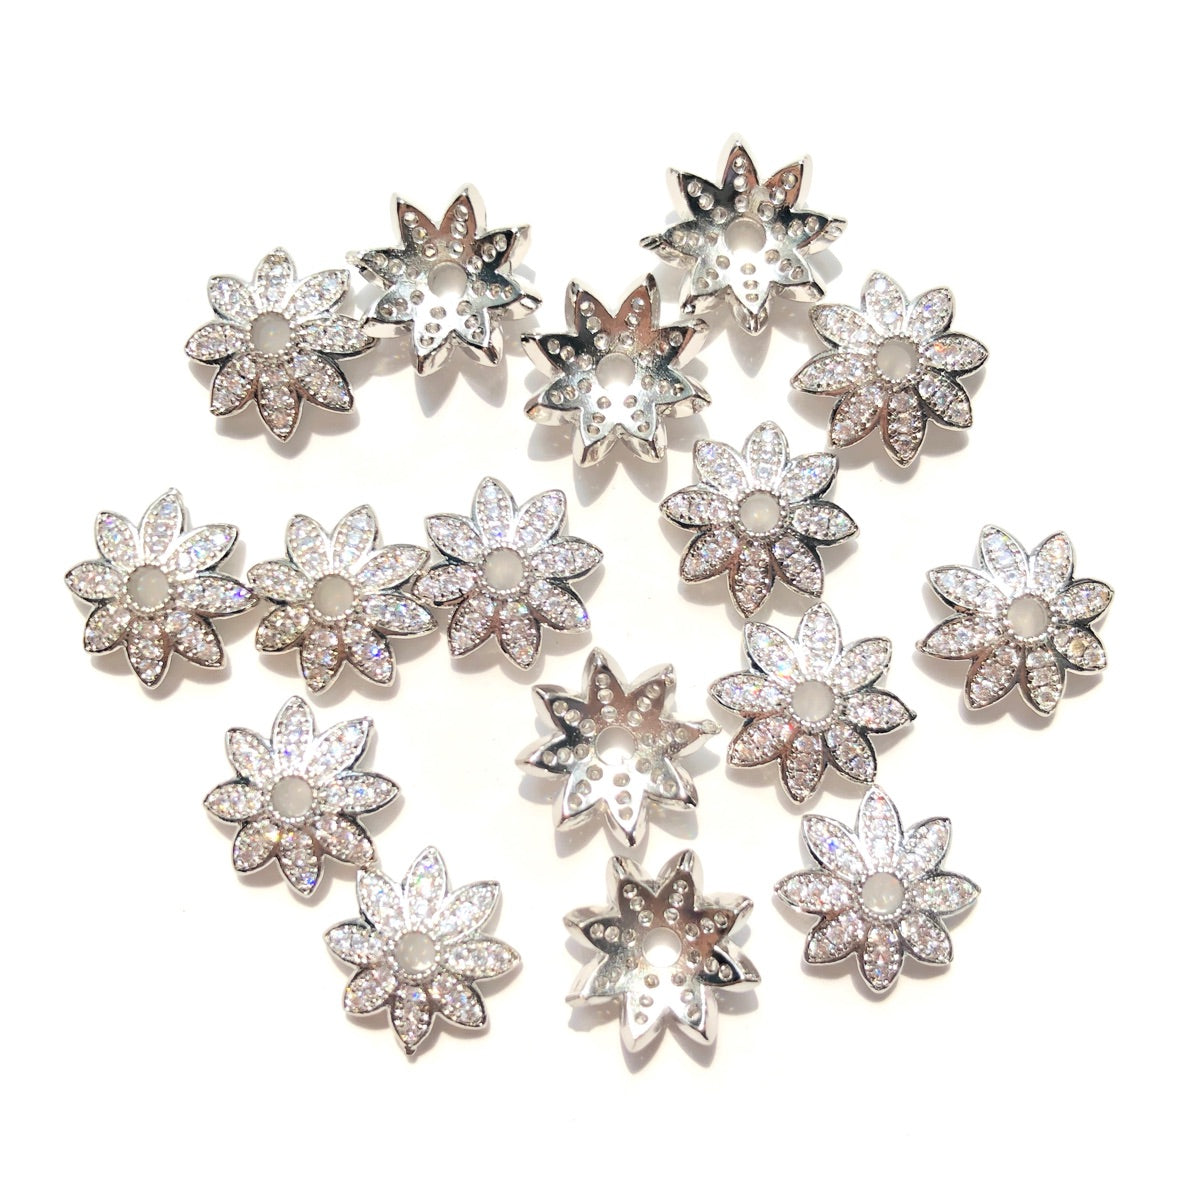 20pcs/lot 12mm CZ Paved Beads Caps Flower Spacers Silver CZ Paved Spacers Beads Caps New Spacers Arrivals Wholesale Charms Beads Beyond